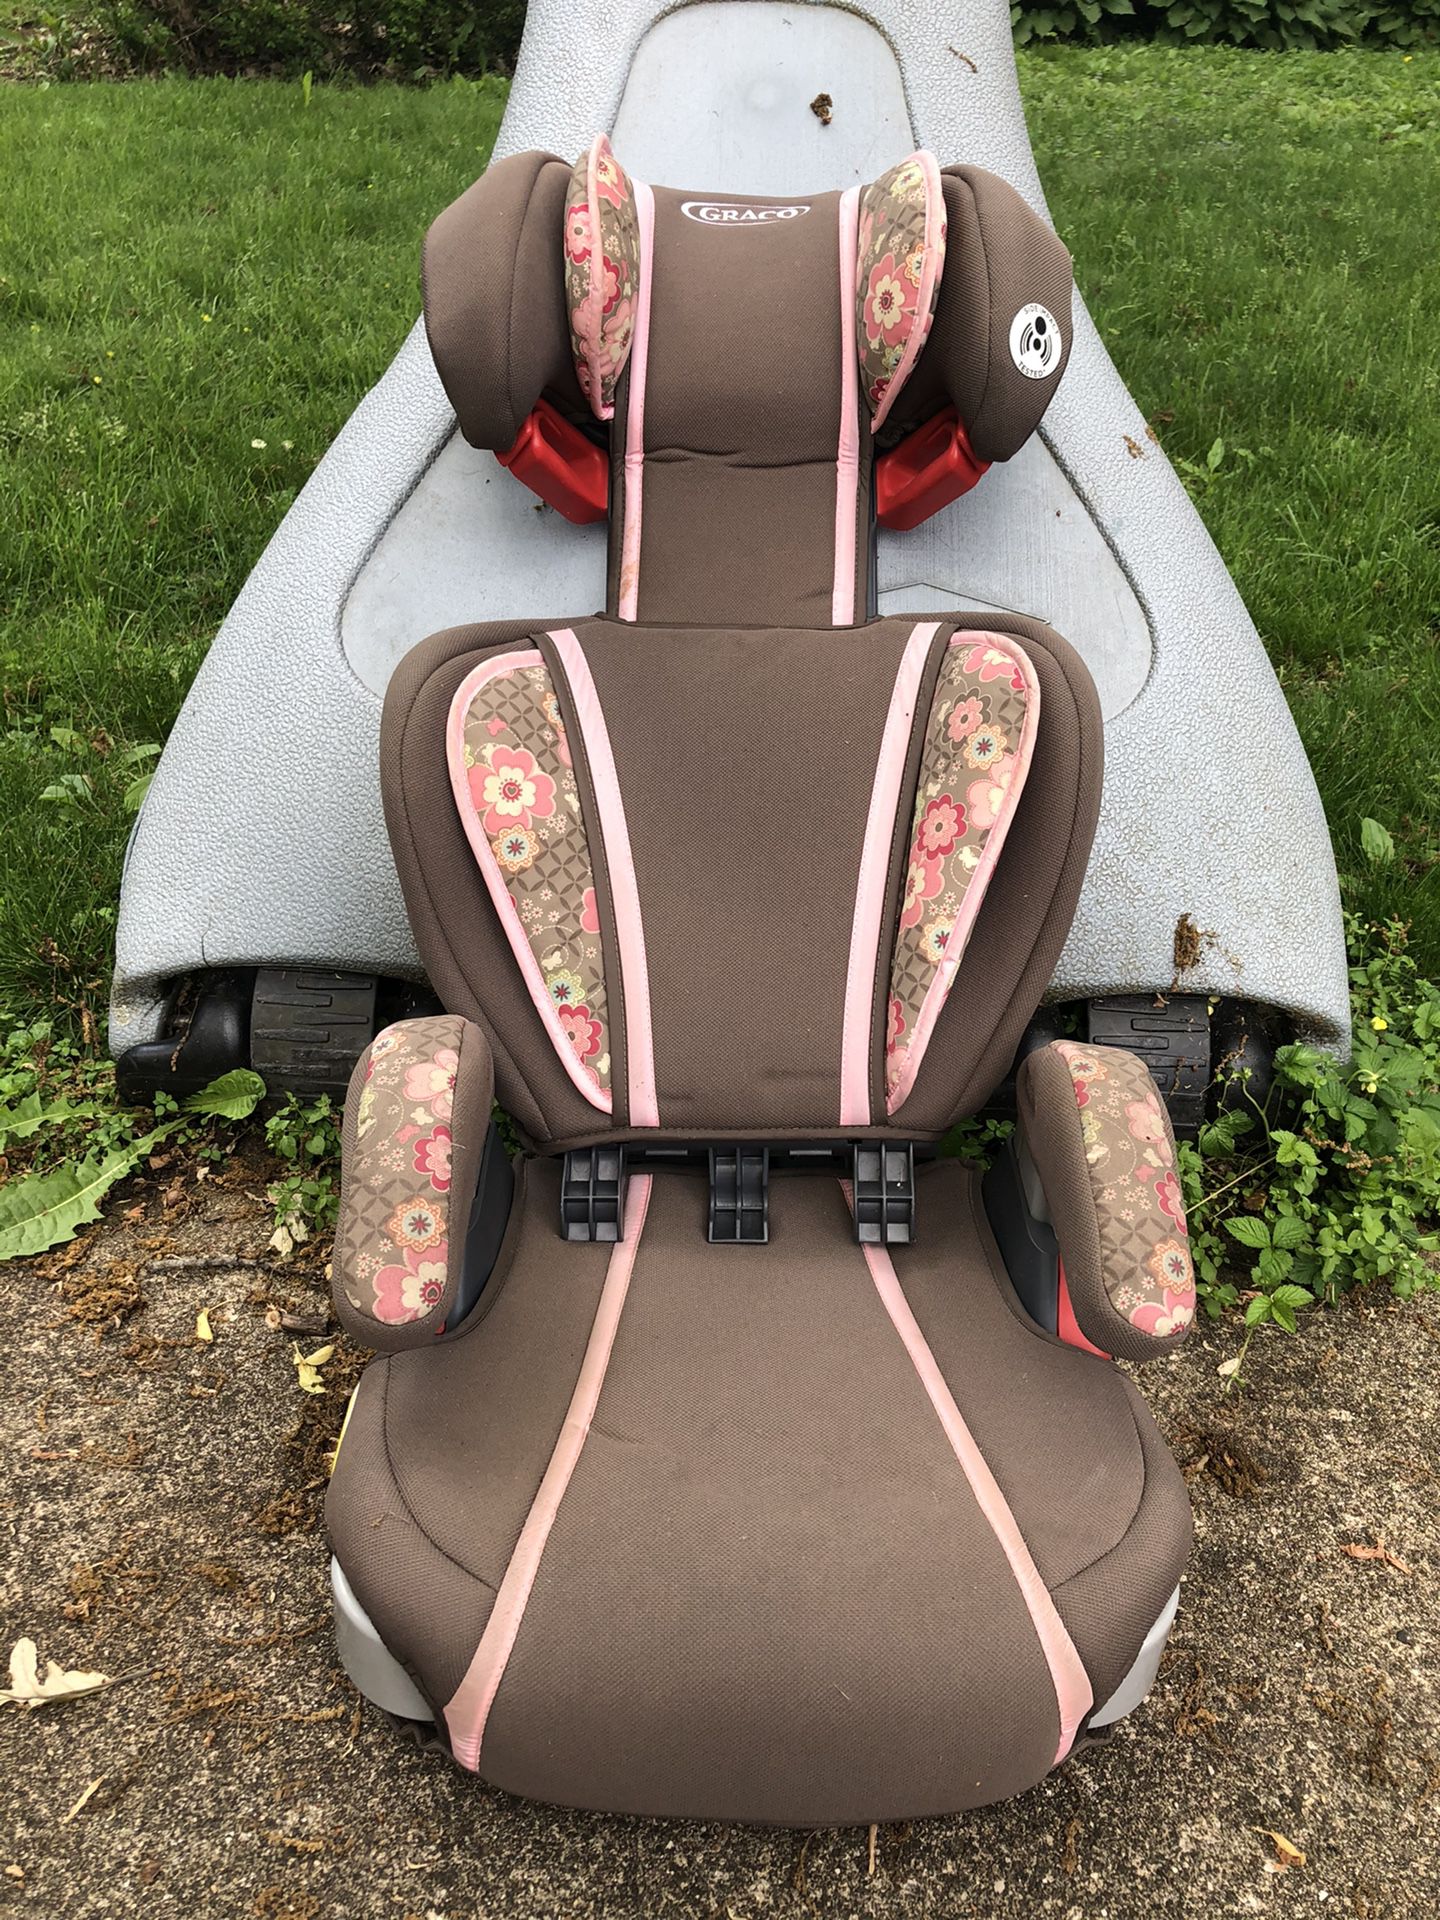 Used Graco Car seat with separate booster seat